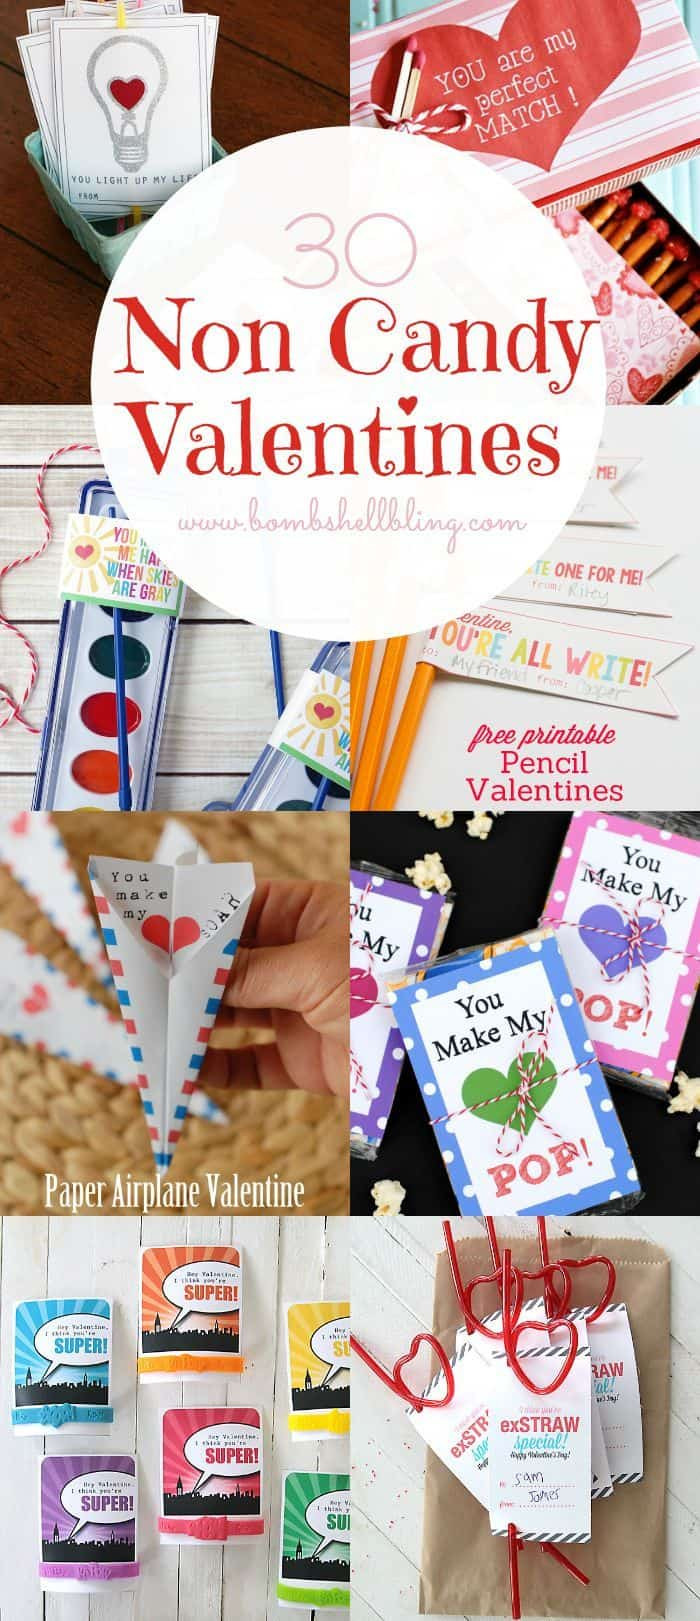 Valentine Gift Ideas For School
 10 Non Candy Valentine s Day Gift Ideas for Kids